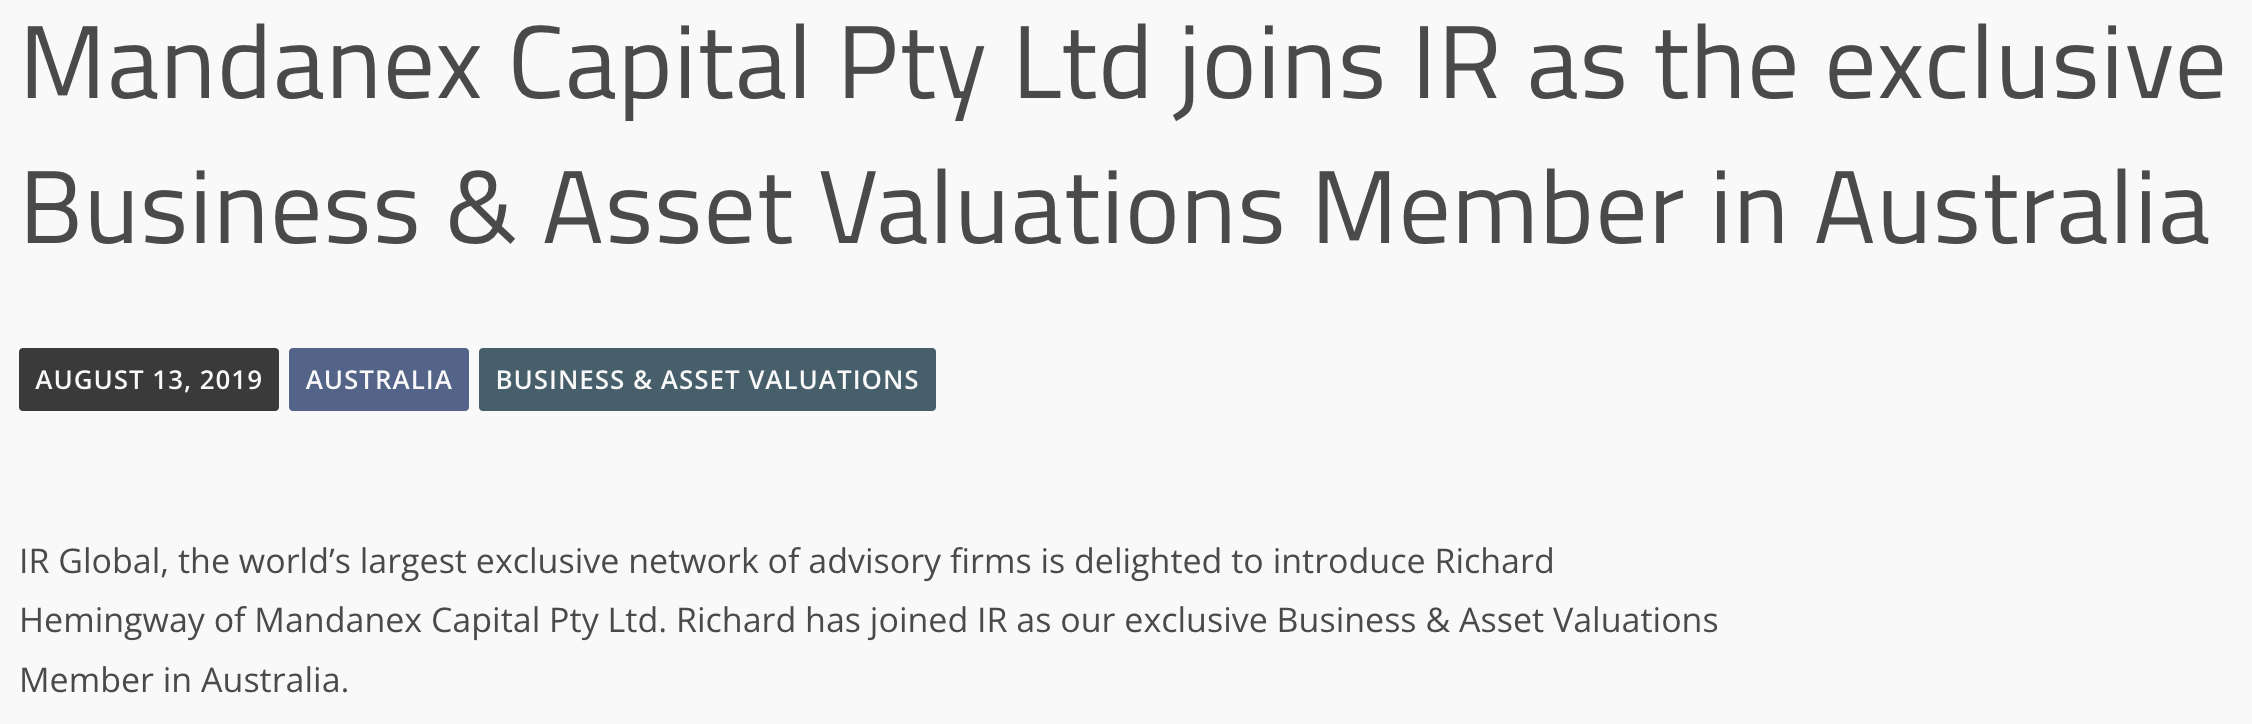 https://www.irglobal.com/article/mandanex-capital-pty-ltd-joins-ir-as-the-exclusive-business-asset-valuations-member-in-australia/